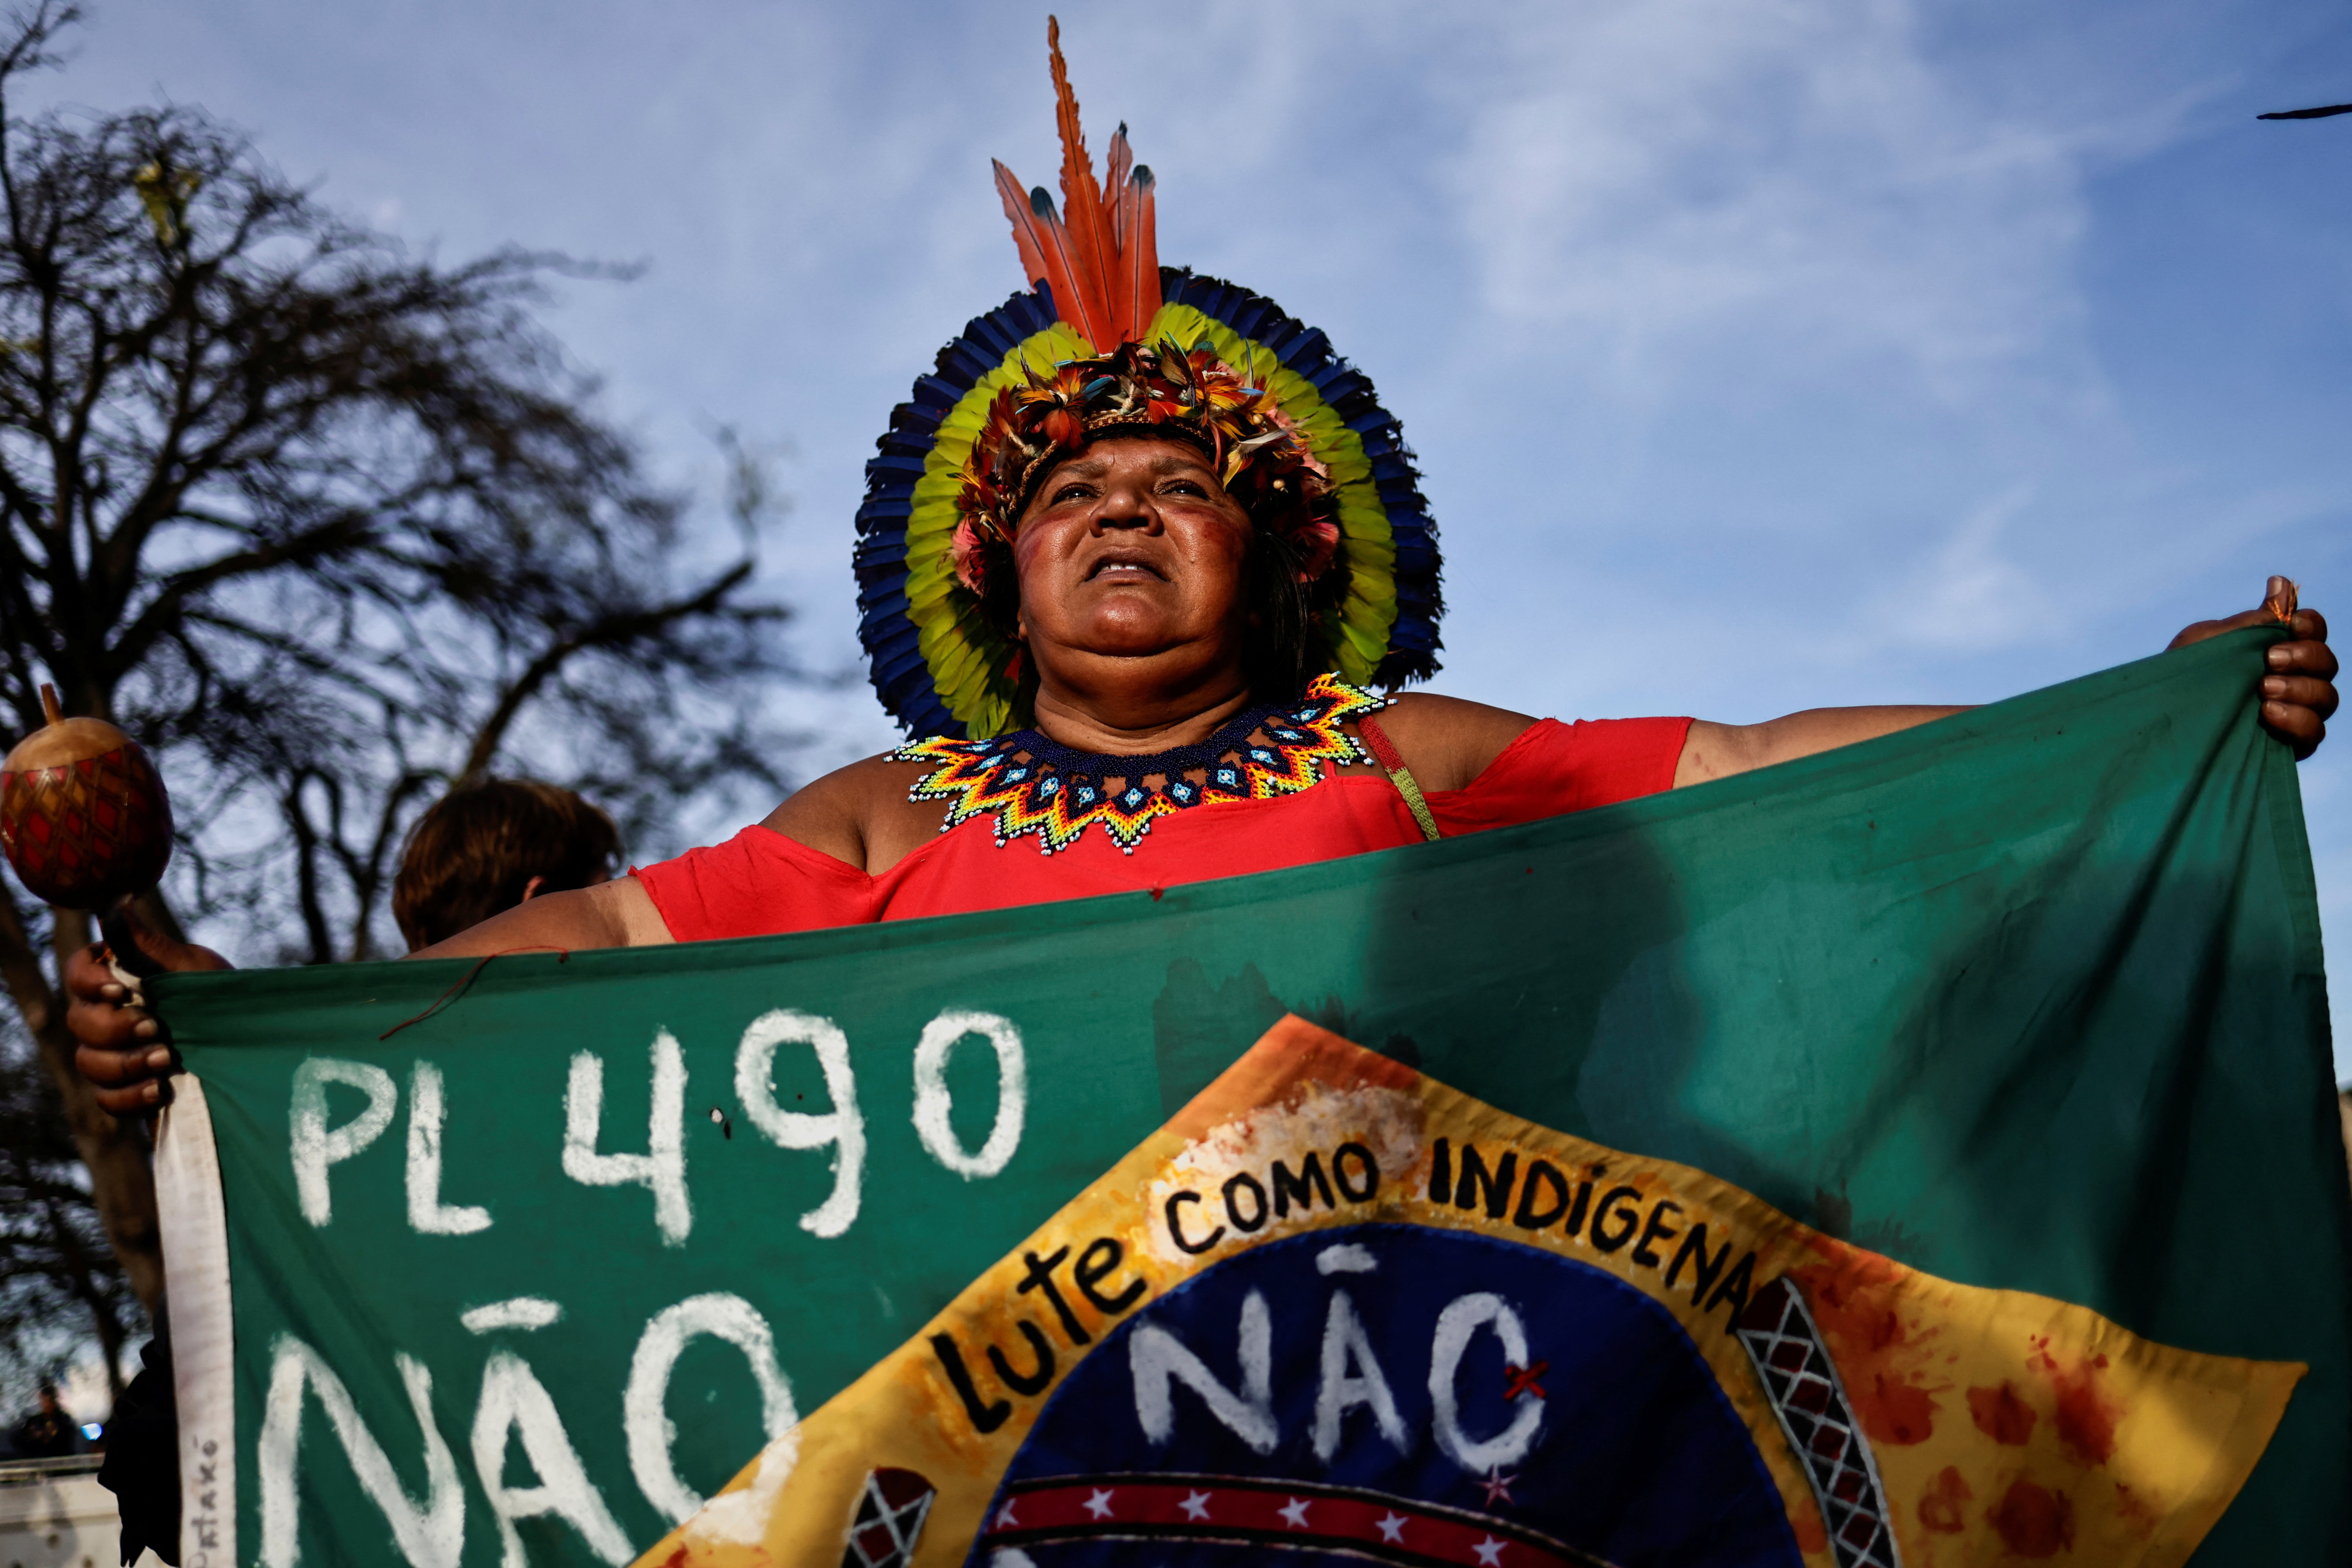 Welcome Change: Brazil's indigenous rights & the future of land